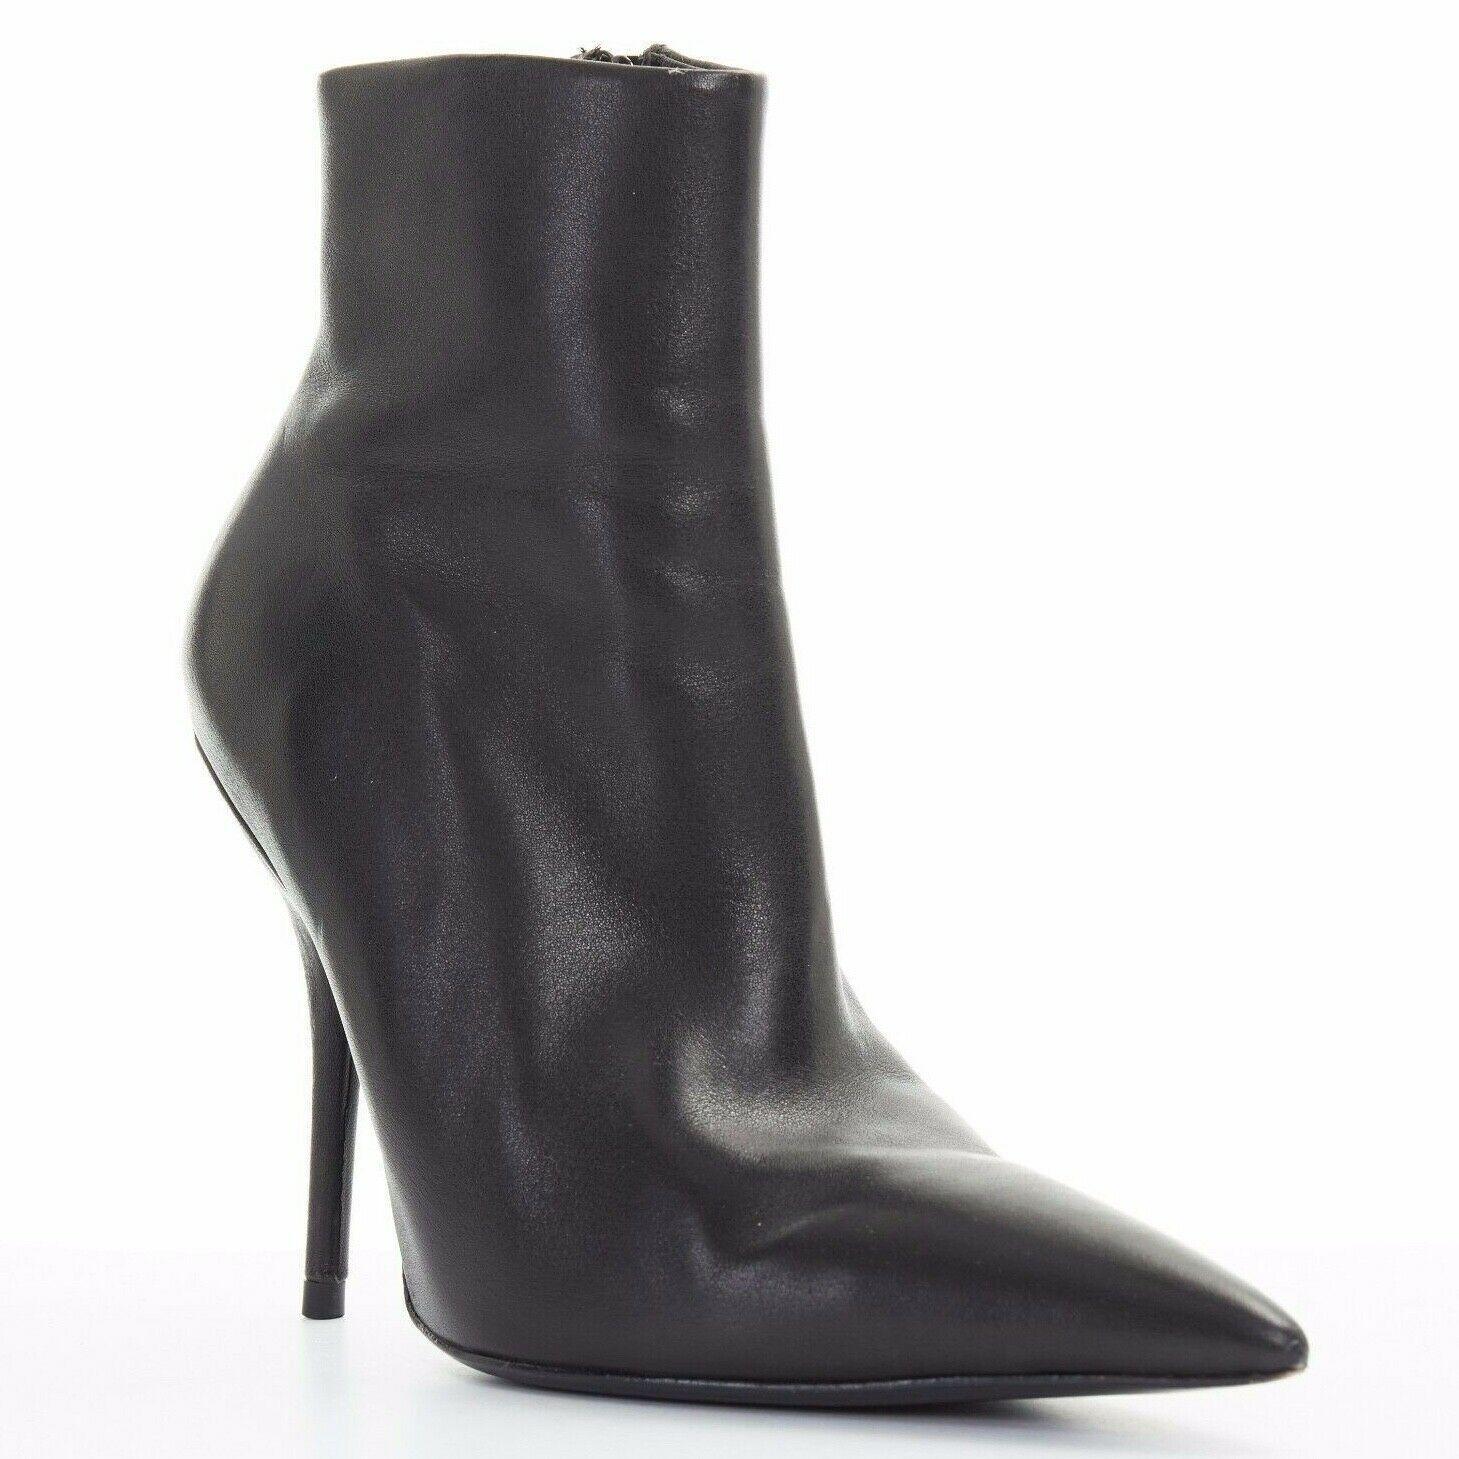 BALENCIAGA black leather Knife pointed toe sculpted slim heel ankle bootie EU35
BALENCIAGA BY DEMNA GVASALIA
Knife bootie. 
Black leather upper. 
Extreme pointed toe. 
Sculted slim high heel. 
Slim fit. 
Zip closure on inner edge. 
Made in